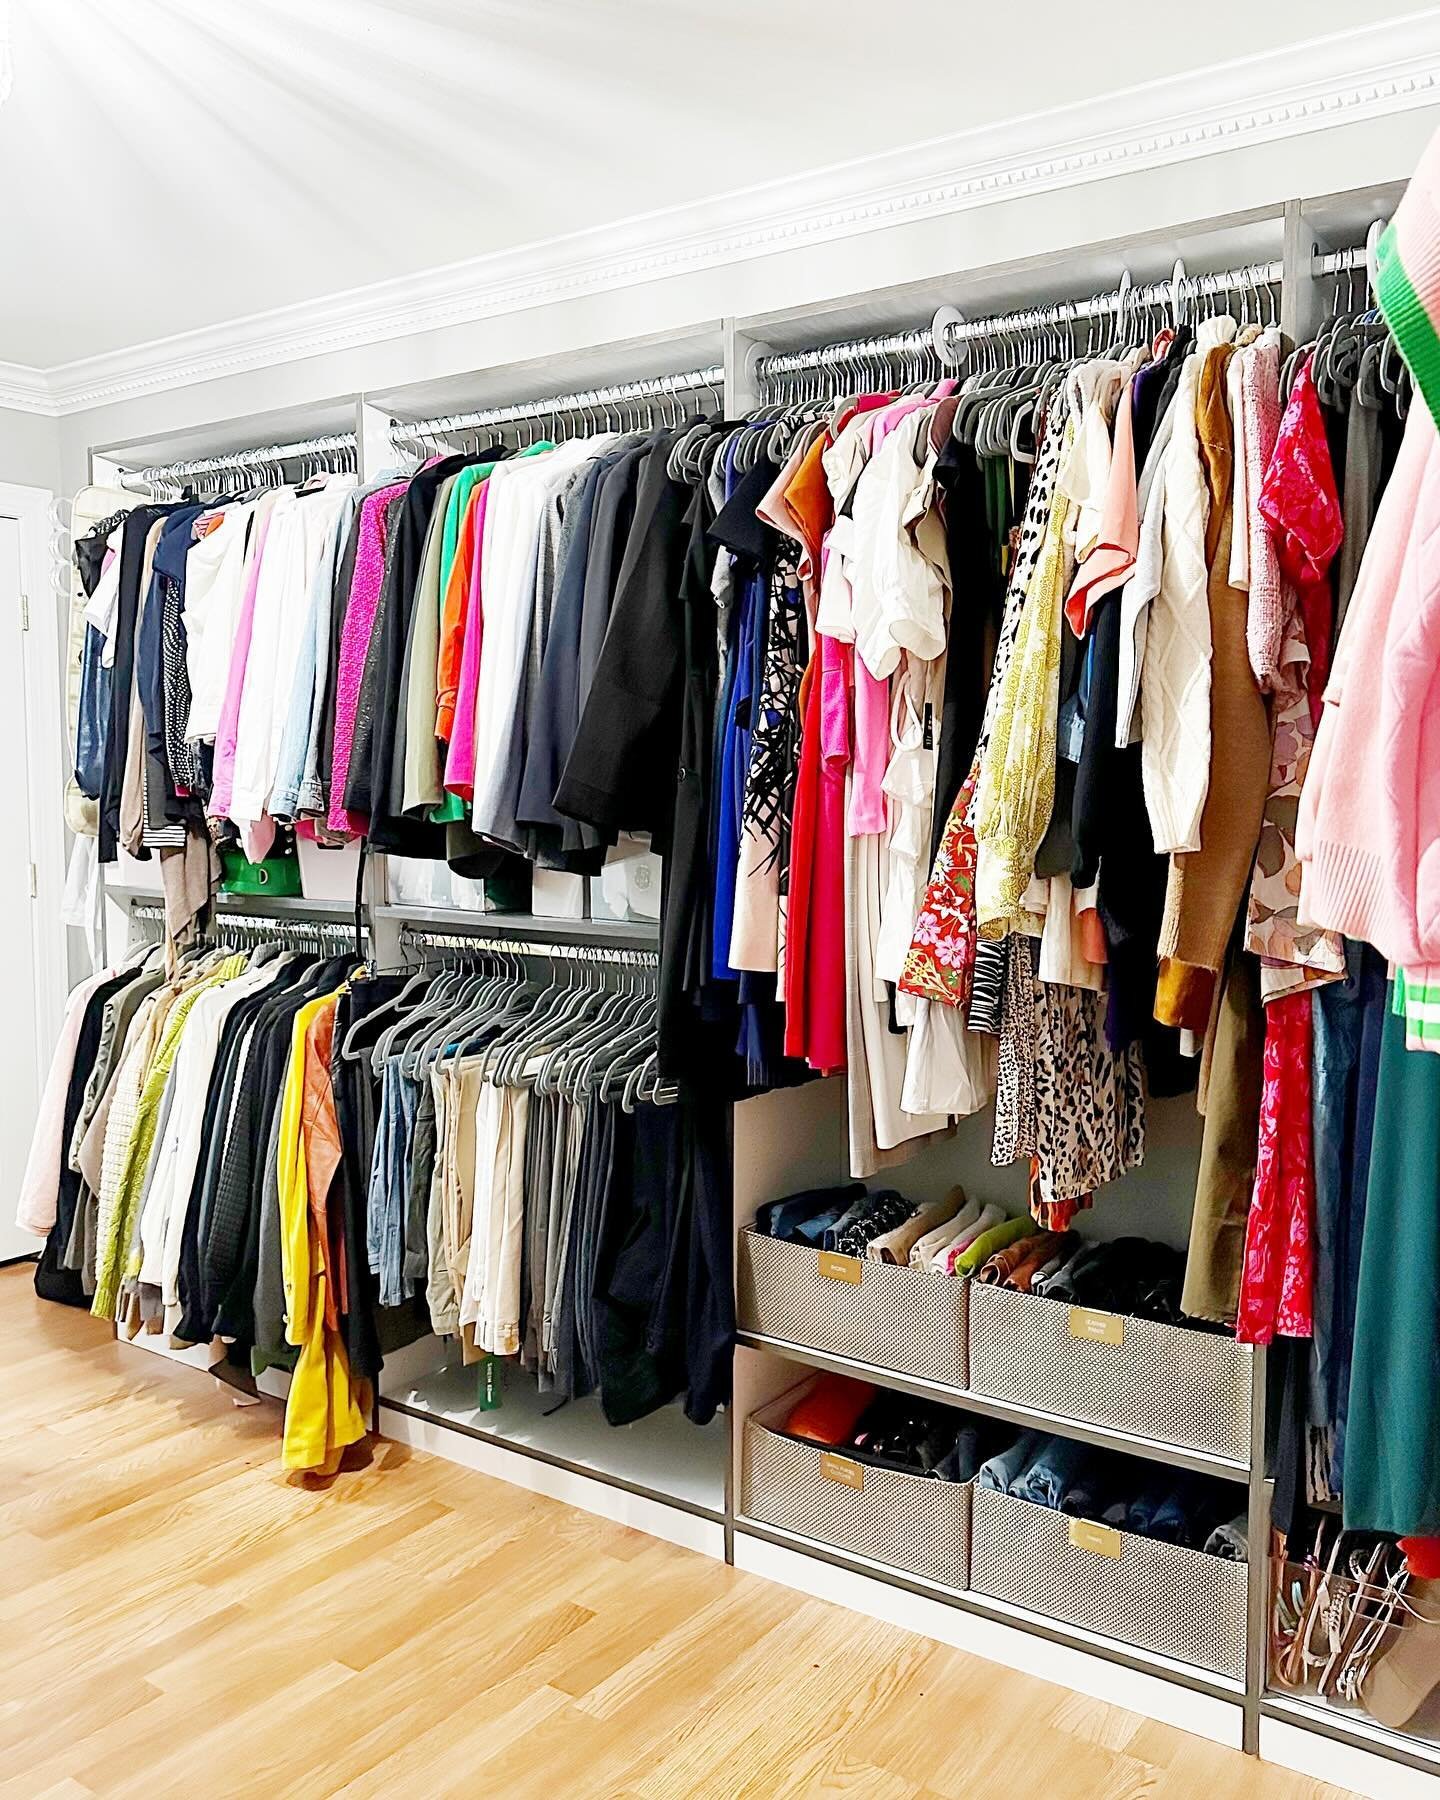 Closet Refresh!!! Same closet 2 different eras.  Oftentimes we have to get creative a reconfigured spaces. &thinsp;
&thinsp;
As we refresh for our repeat clients we take note on their habits and what will make their everyday much easier. &thinsp;
&th